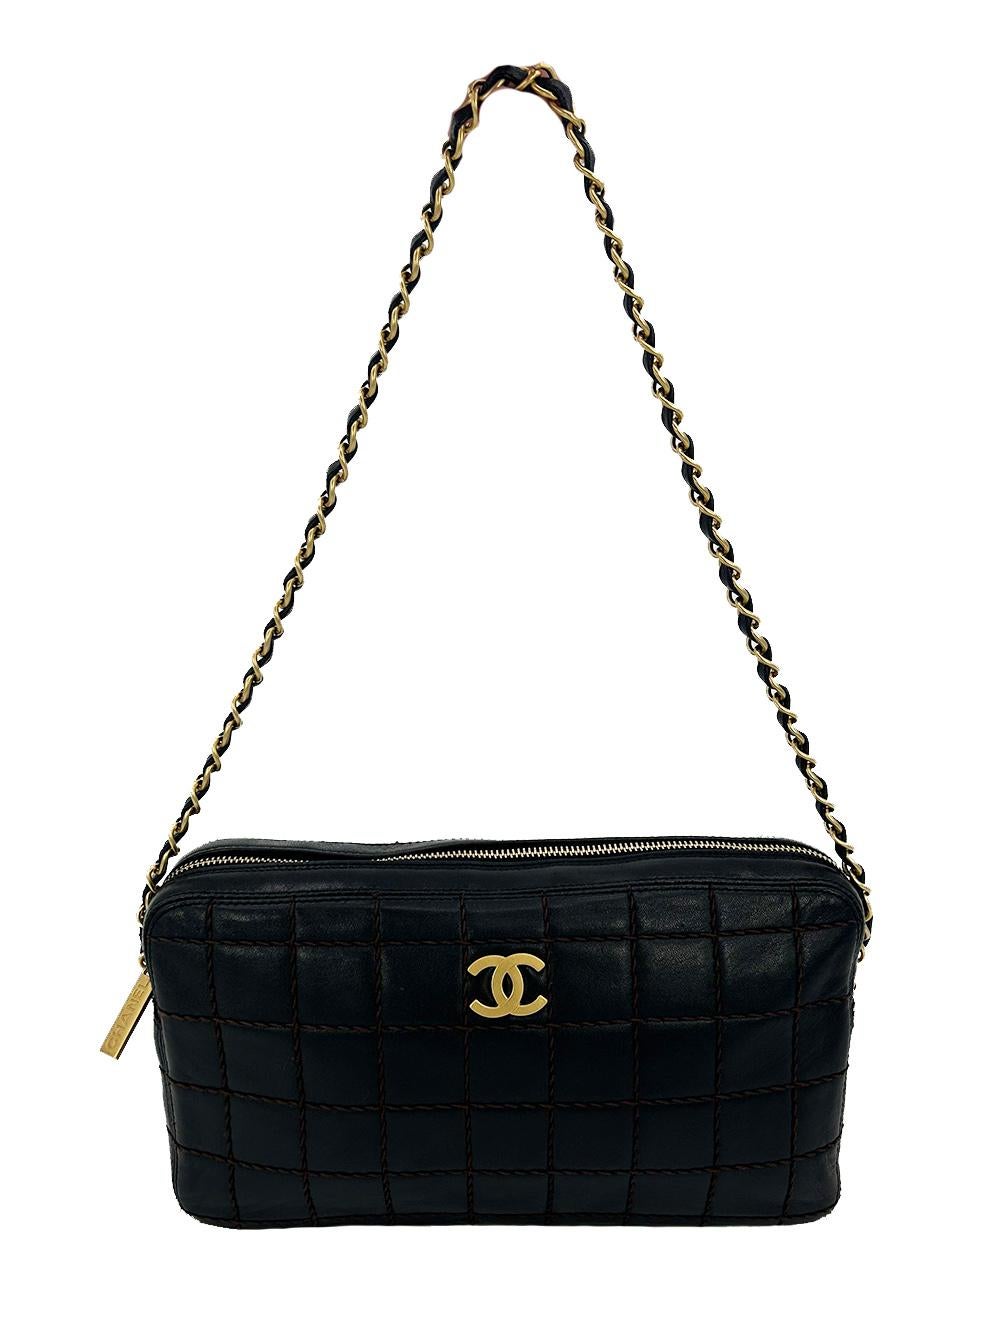 Chanel Black Square Quilted East West Chocolate Bar Bag 4